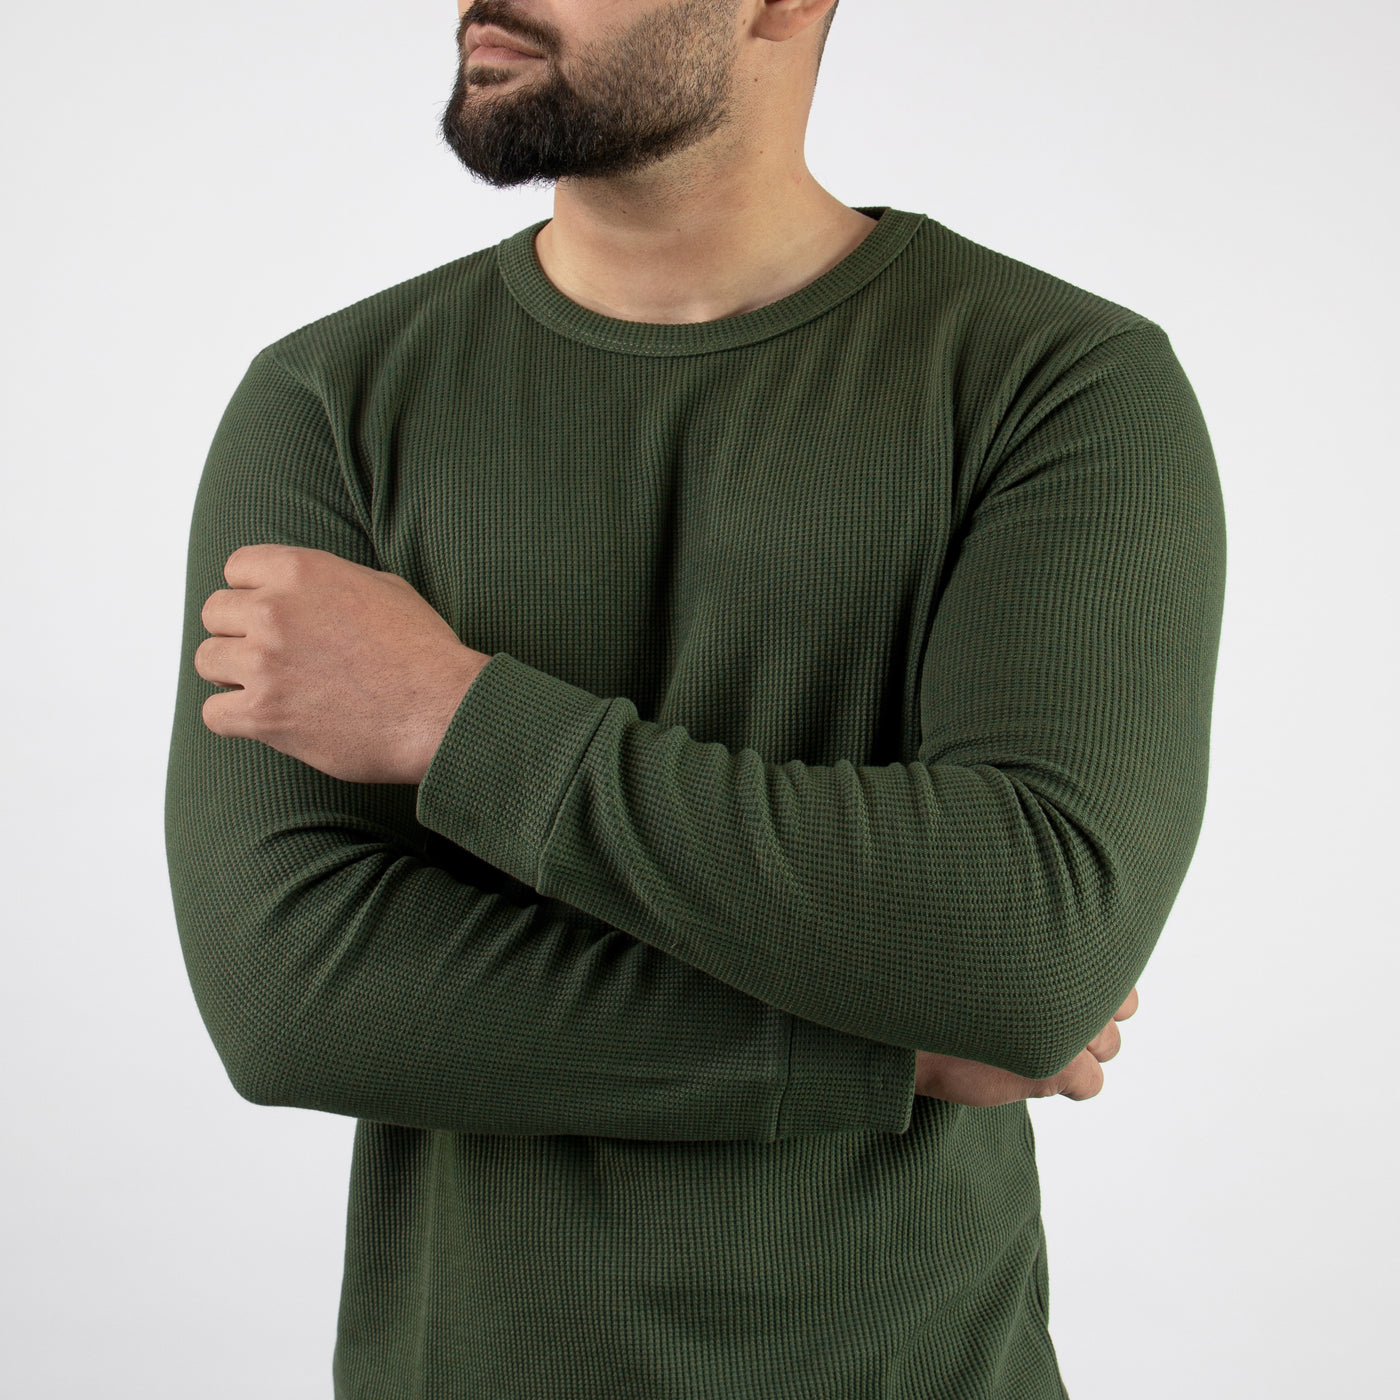 Olive Thermal Full Sleeves Waffle-Knit